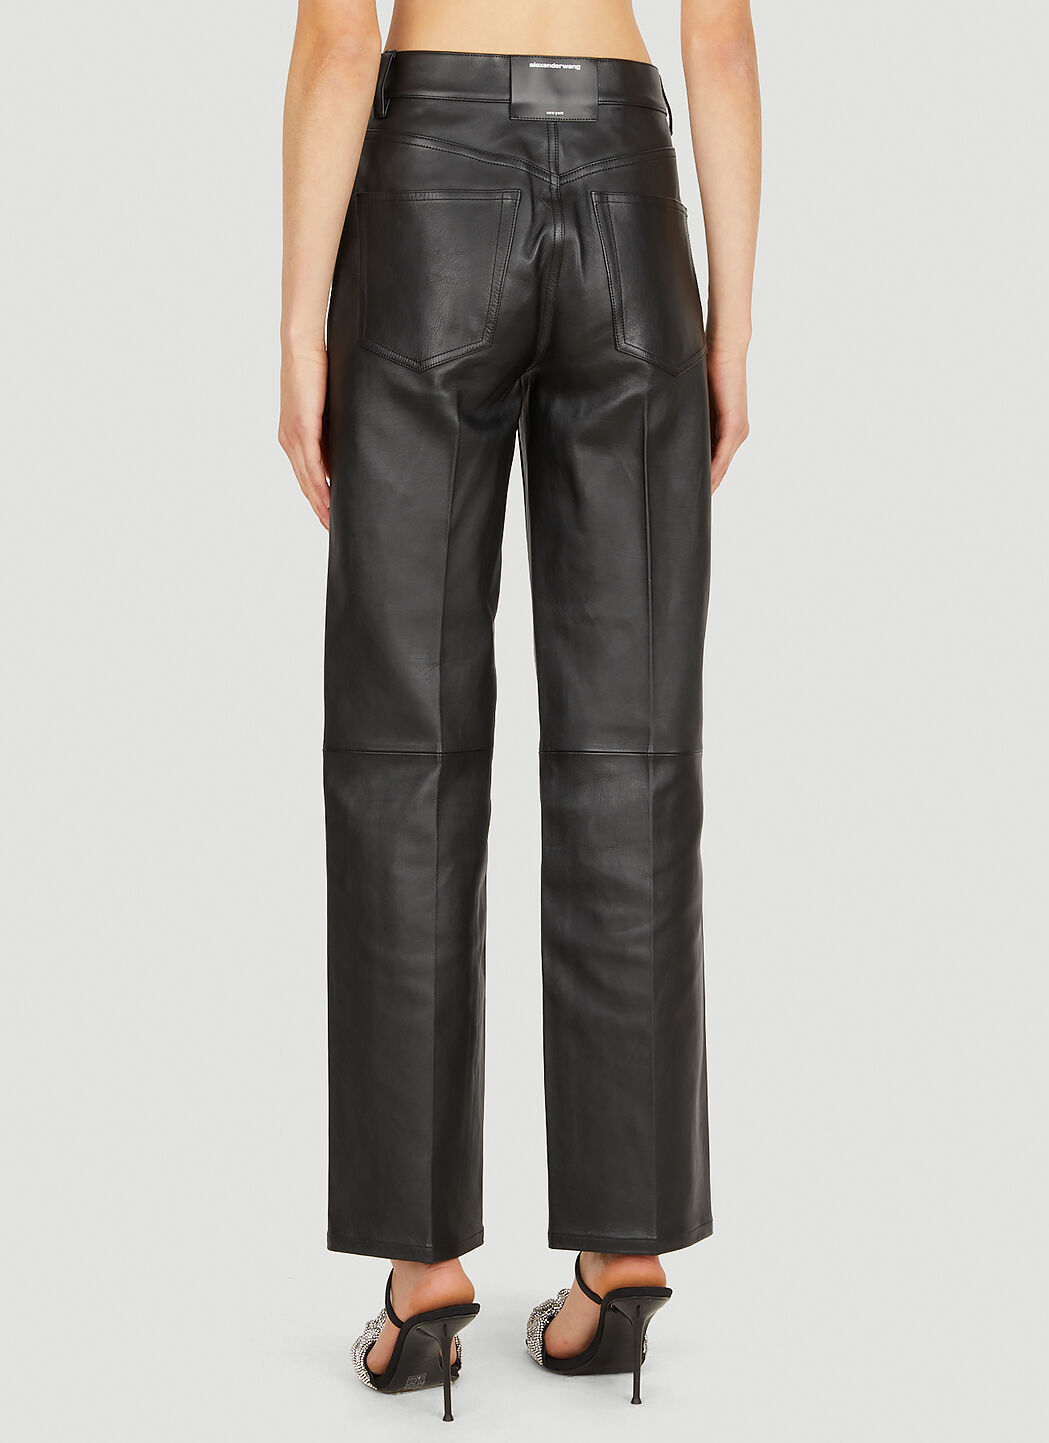 Womens Leather Alexander Wang Clothing for sale  eBay